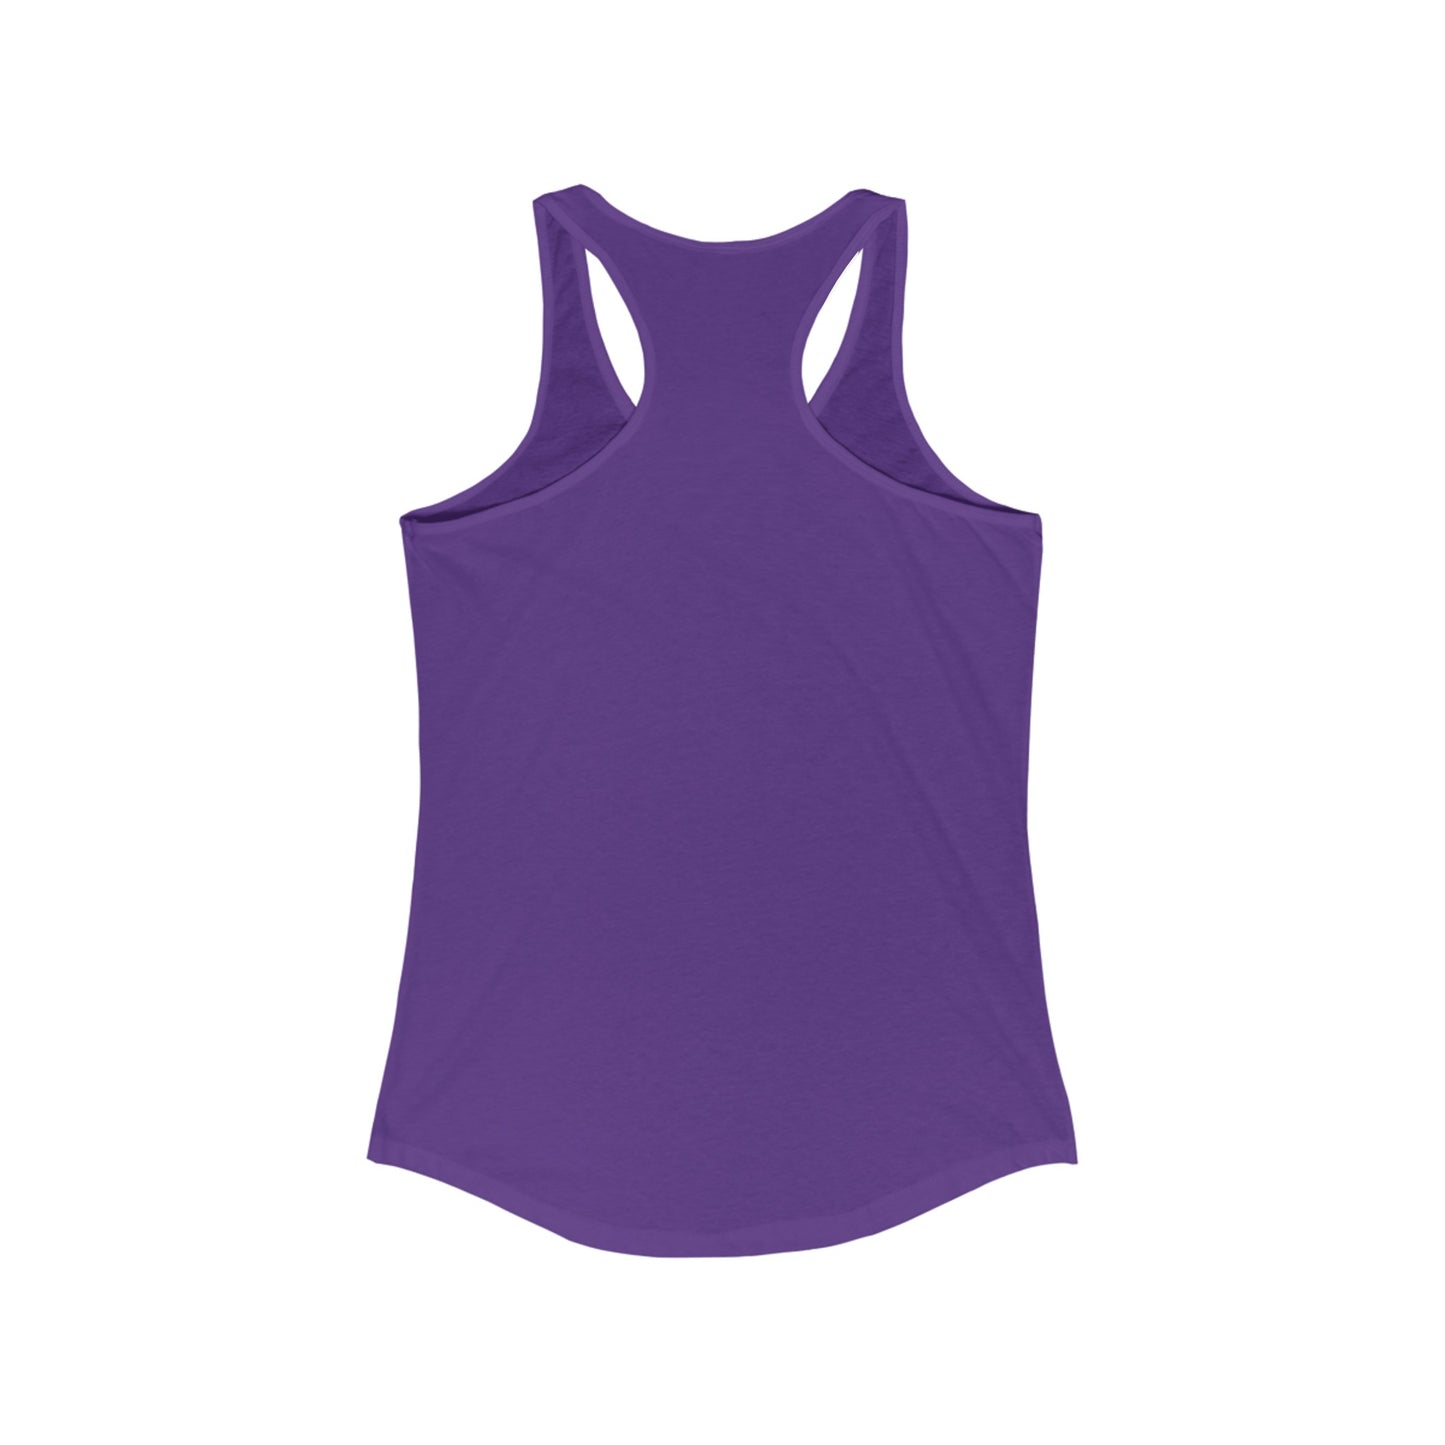 Back View of Lane Studio I'm As Flexible As My Morals Graphic Solid Purple Rush Racerback Tank-Top